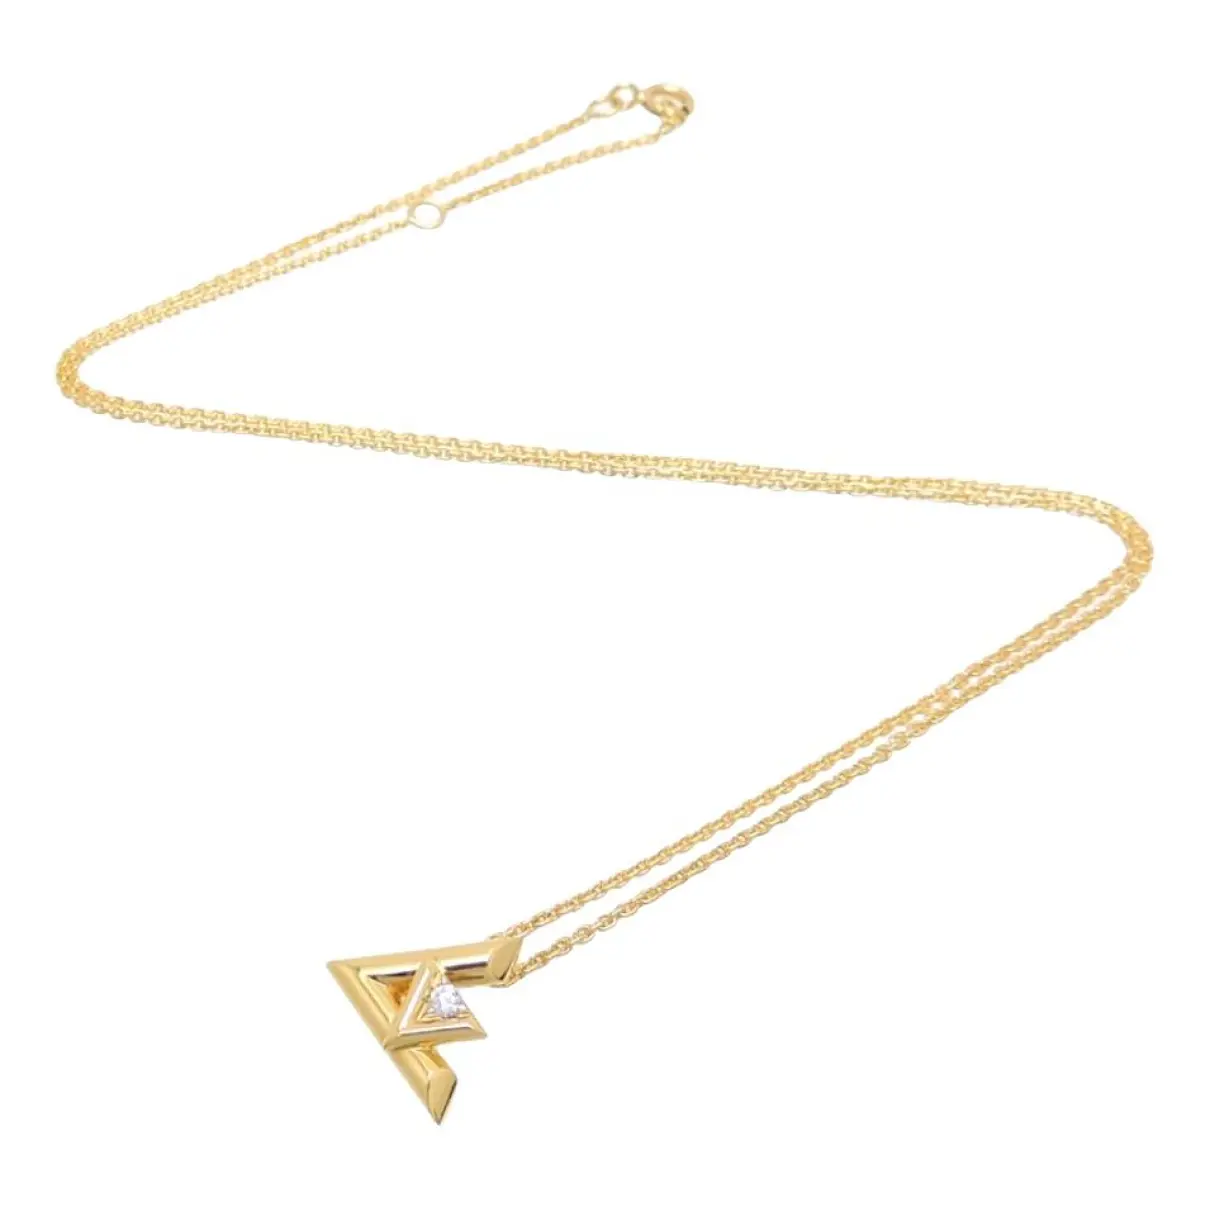 LV Volt One yellow gold necklace